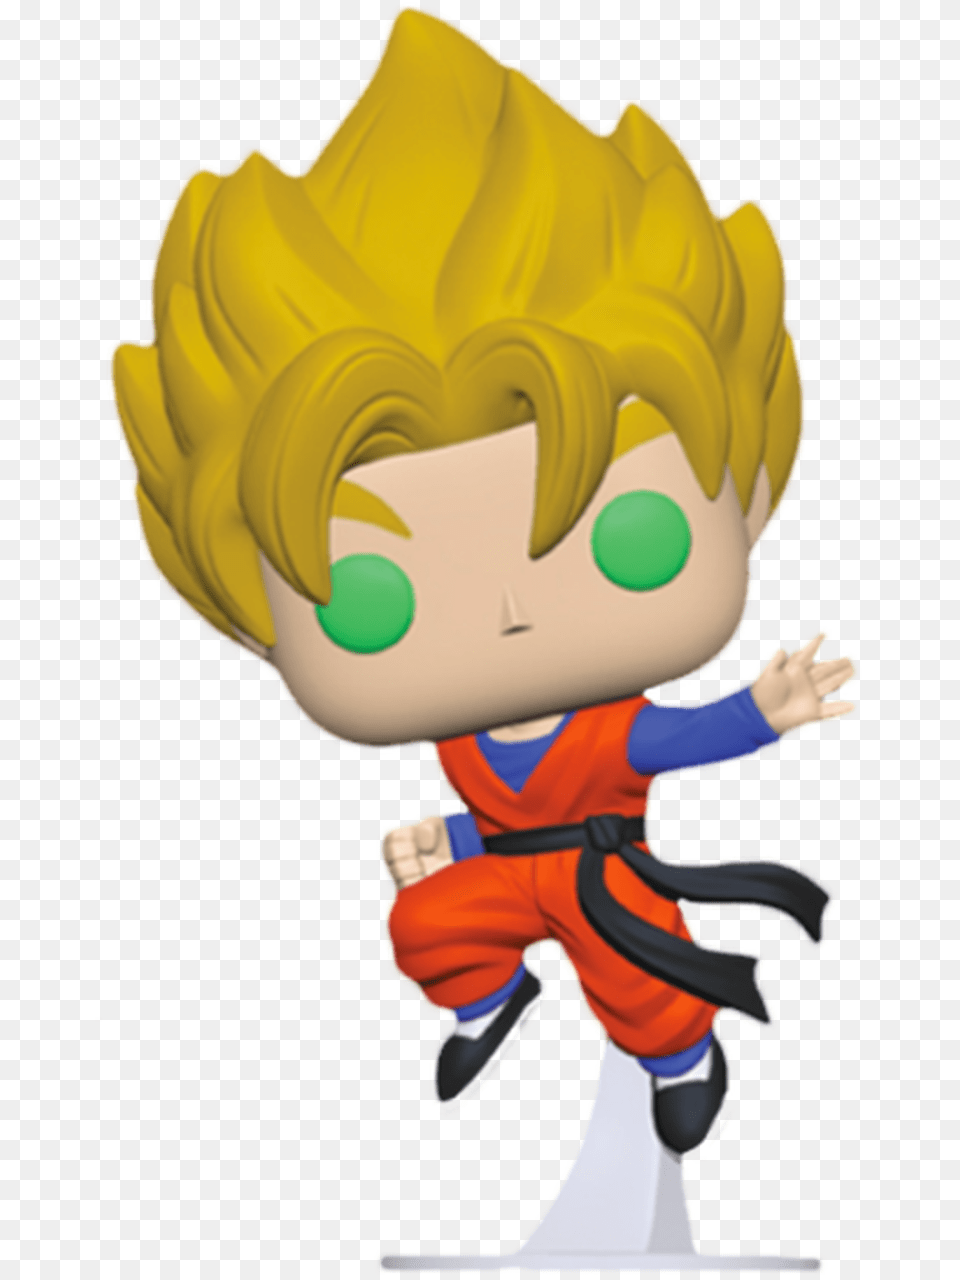 Bundled With Pop Box Protector Case Anime Dragon Ball Super Super Saiyan 3 Gotenks Funko Pop, Baby, Person Png Image